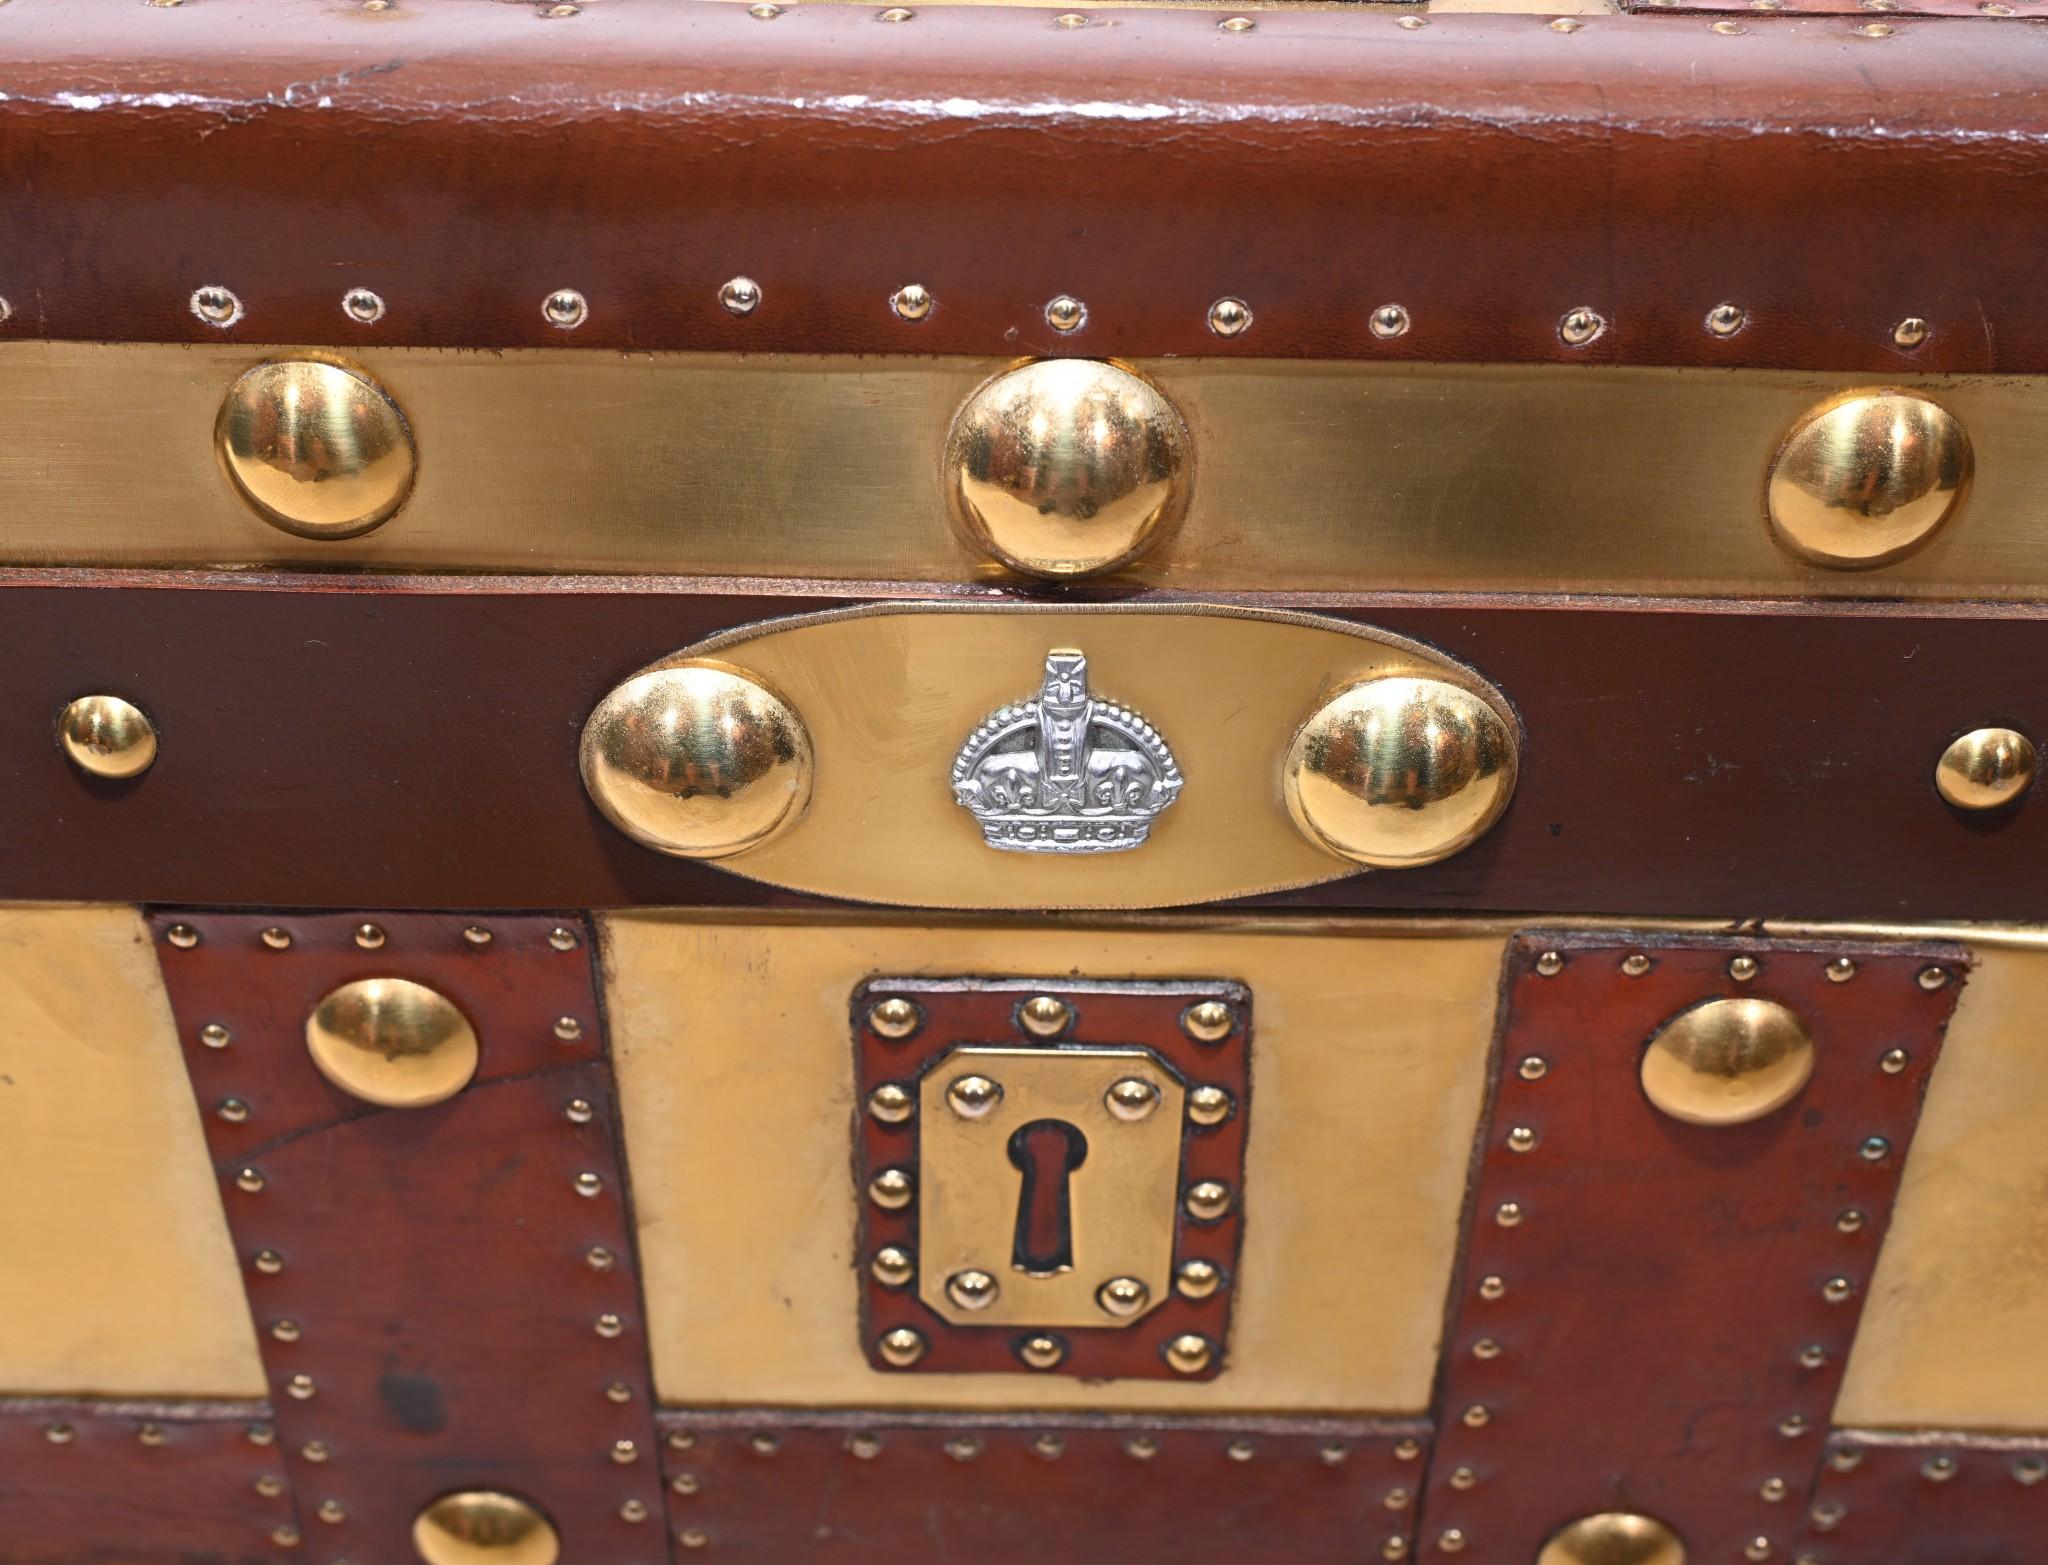 Classic large copper steamer trunk luggage trunk
Would make a great coffee table
Very eye catching colour scheme with copper overlaid by leather straps

Offered in great shape ready for home use right away
We ship to every corner of the